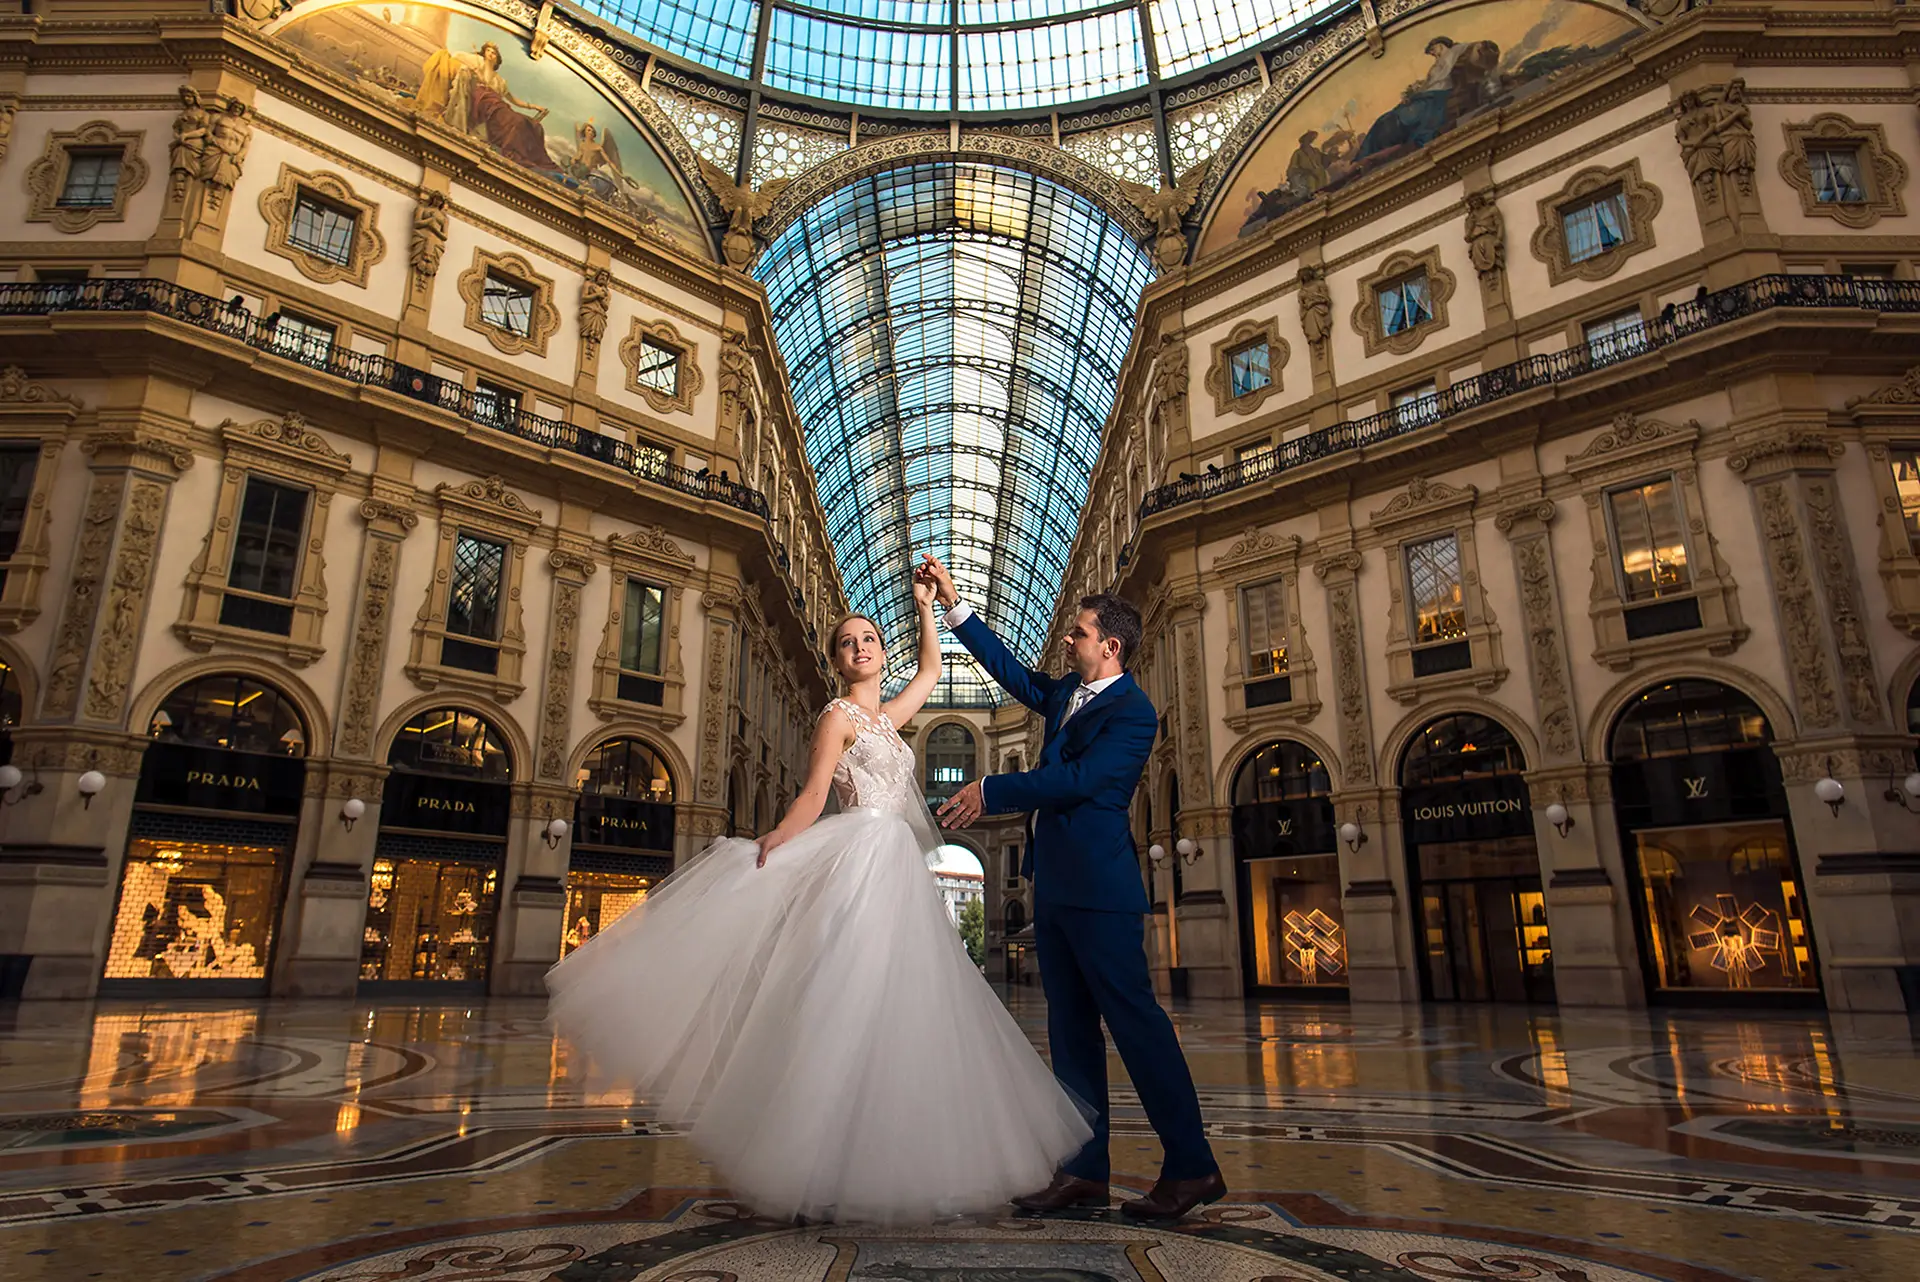 Destiantion Wedding Photography in Italy